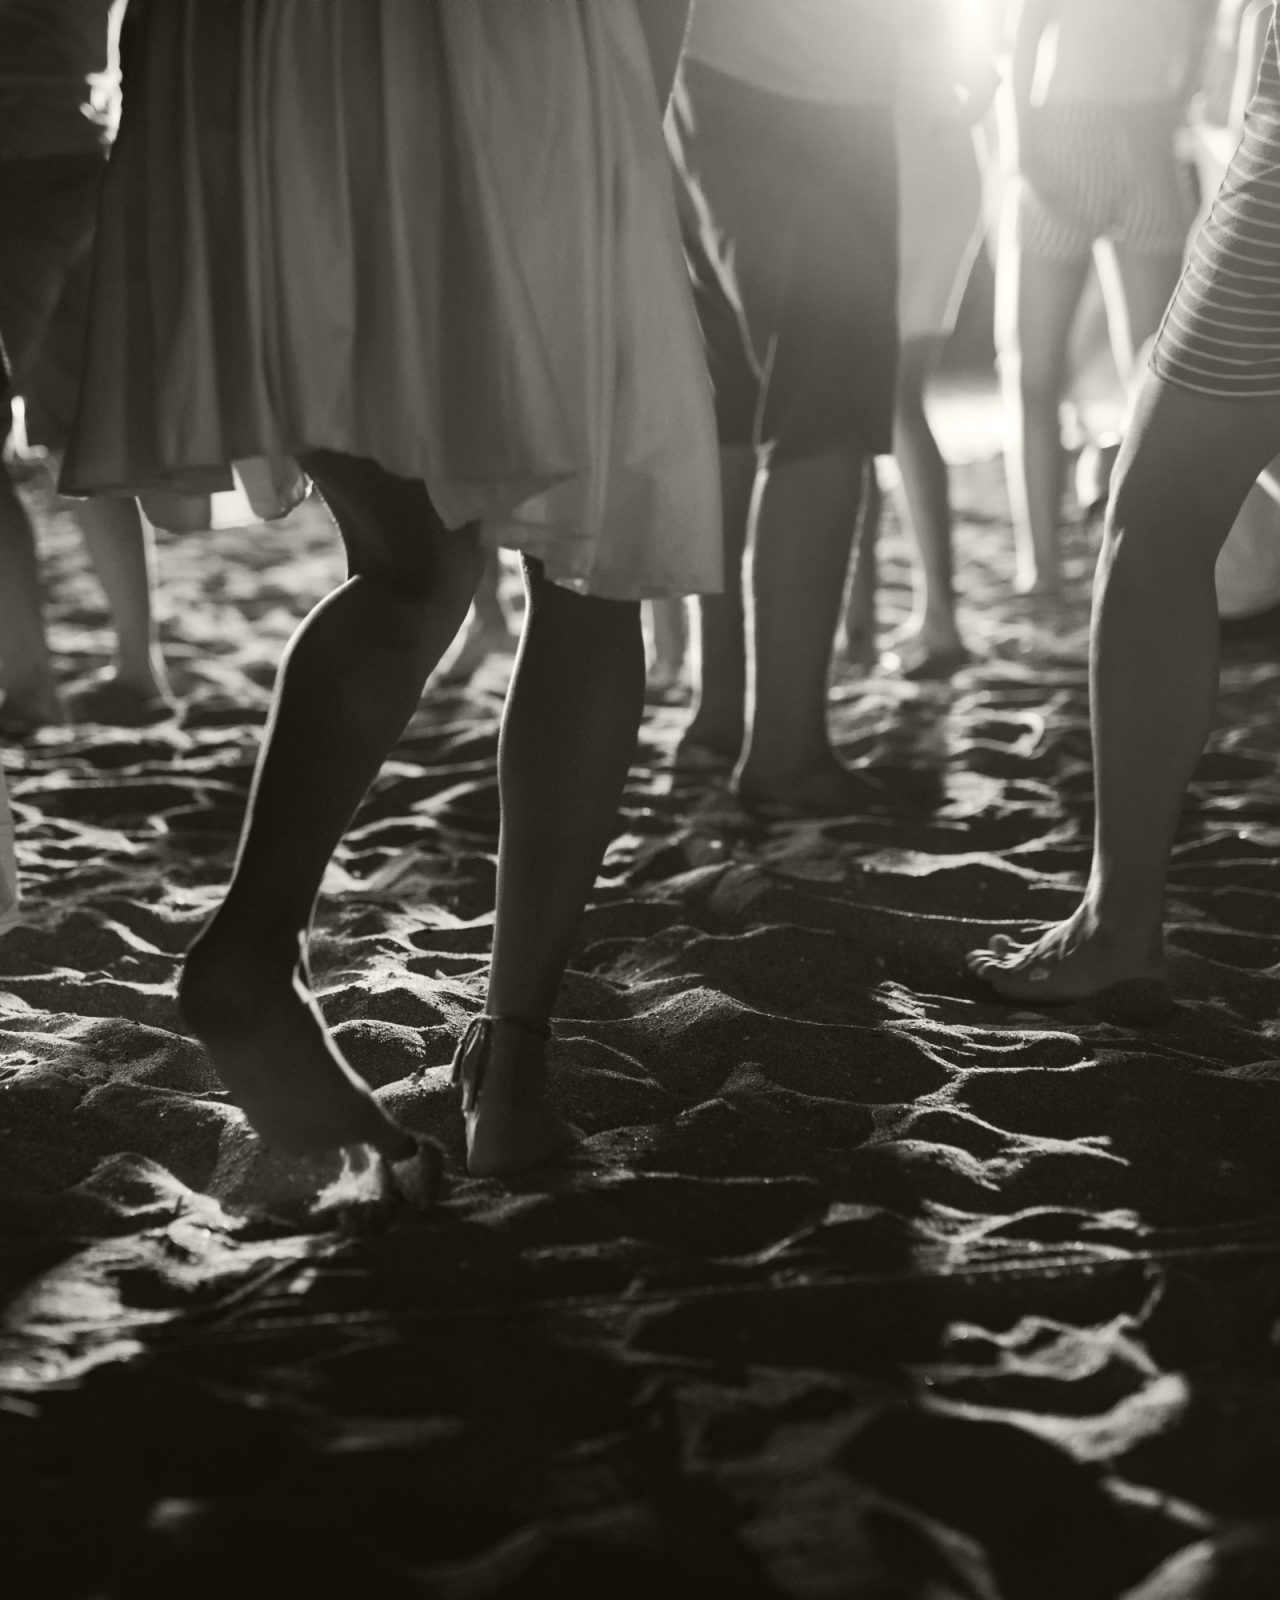 Black and white closeup of people's legs at a nighttime beach dance party